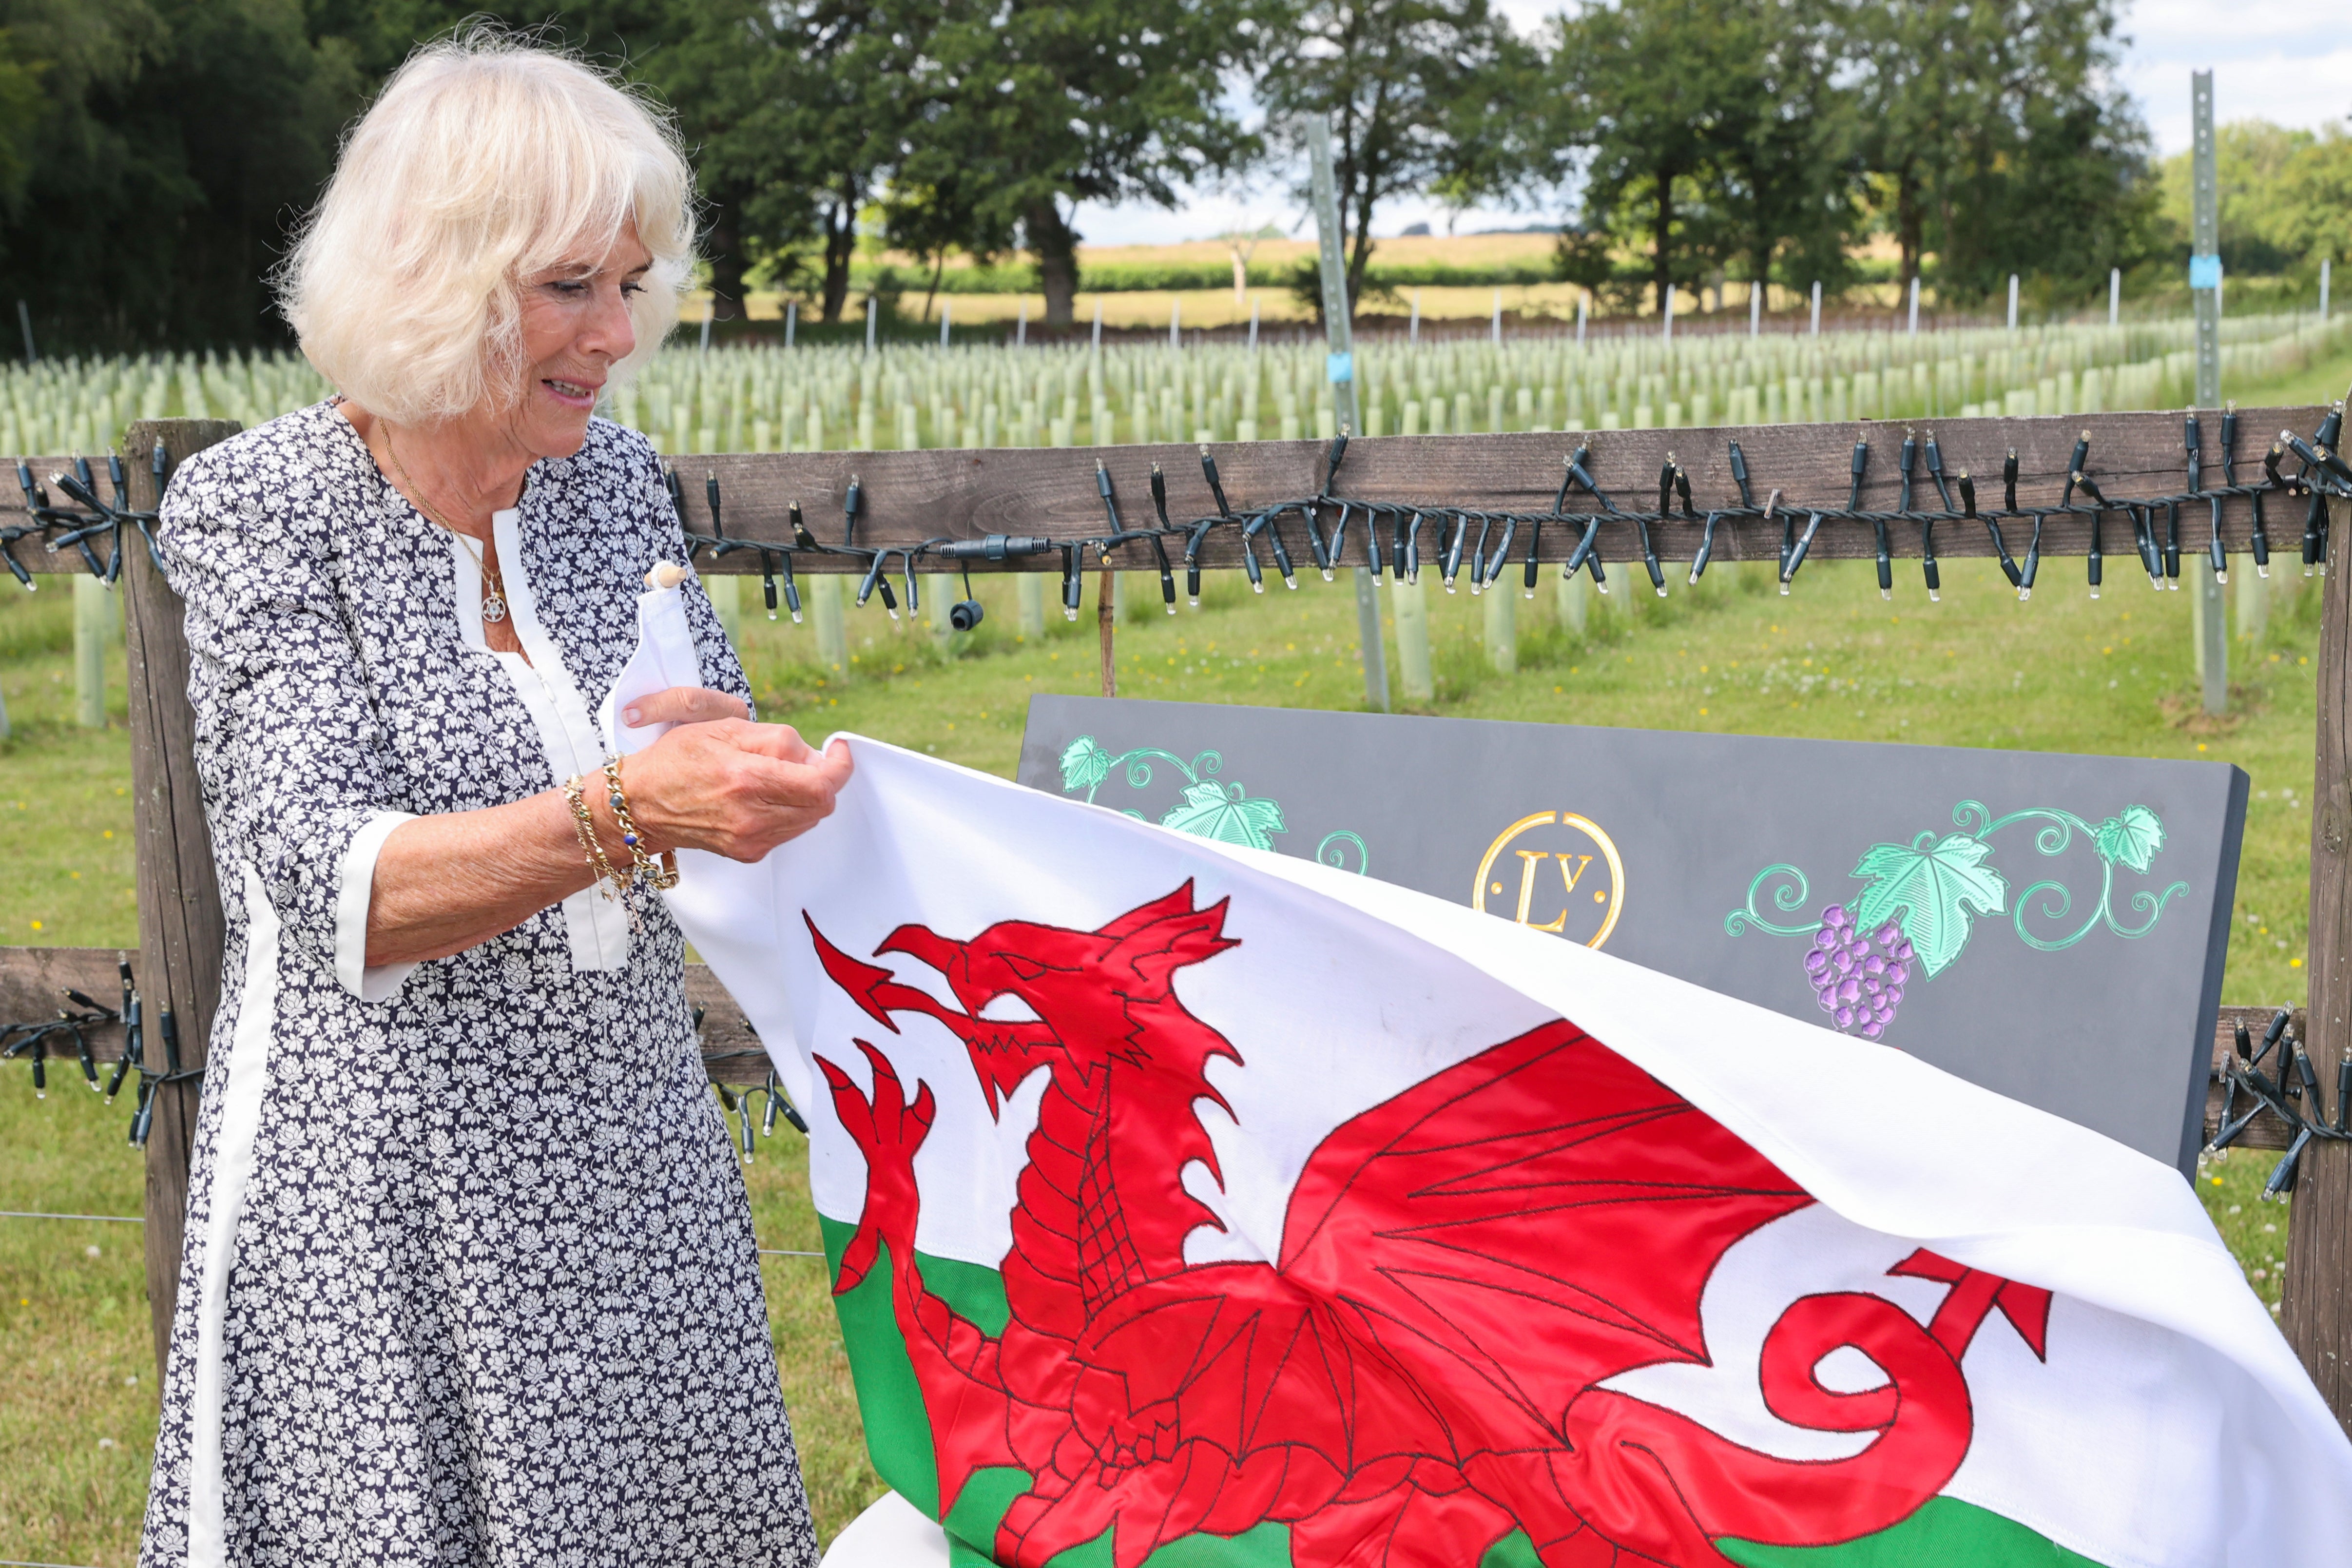 The Duchess of Cornwall, President of Wine GB, unveiled a plaque during a visit marking the 10th anniversary of the Llanerch Vineyard in Pontyclun, as part of a week-long tour of Wales (Chris Jackson/PA)